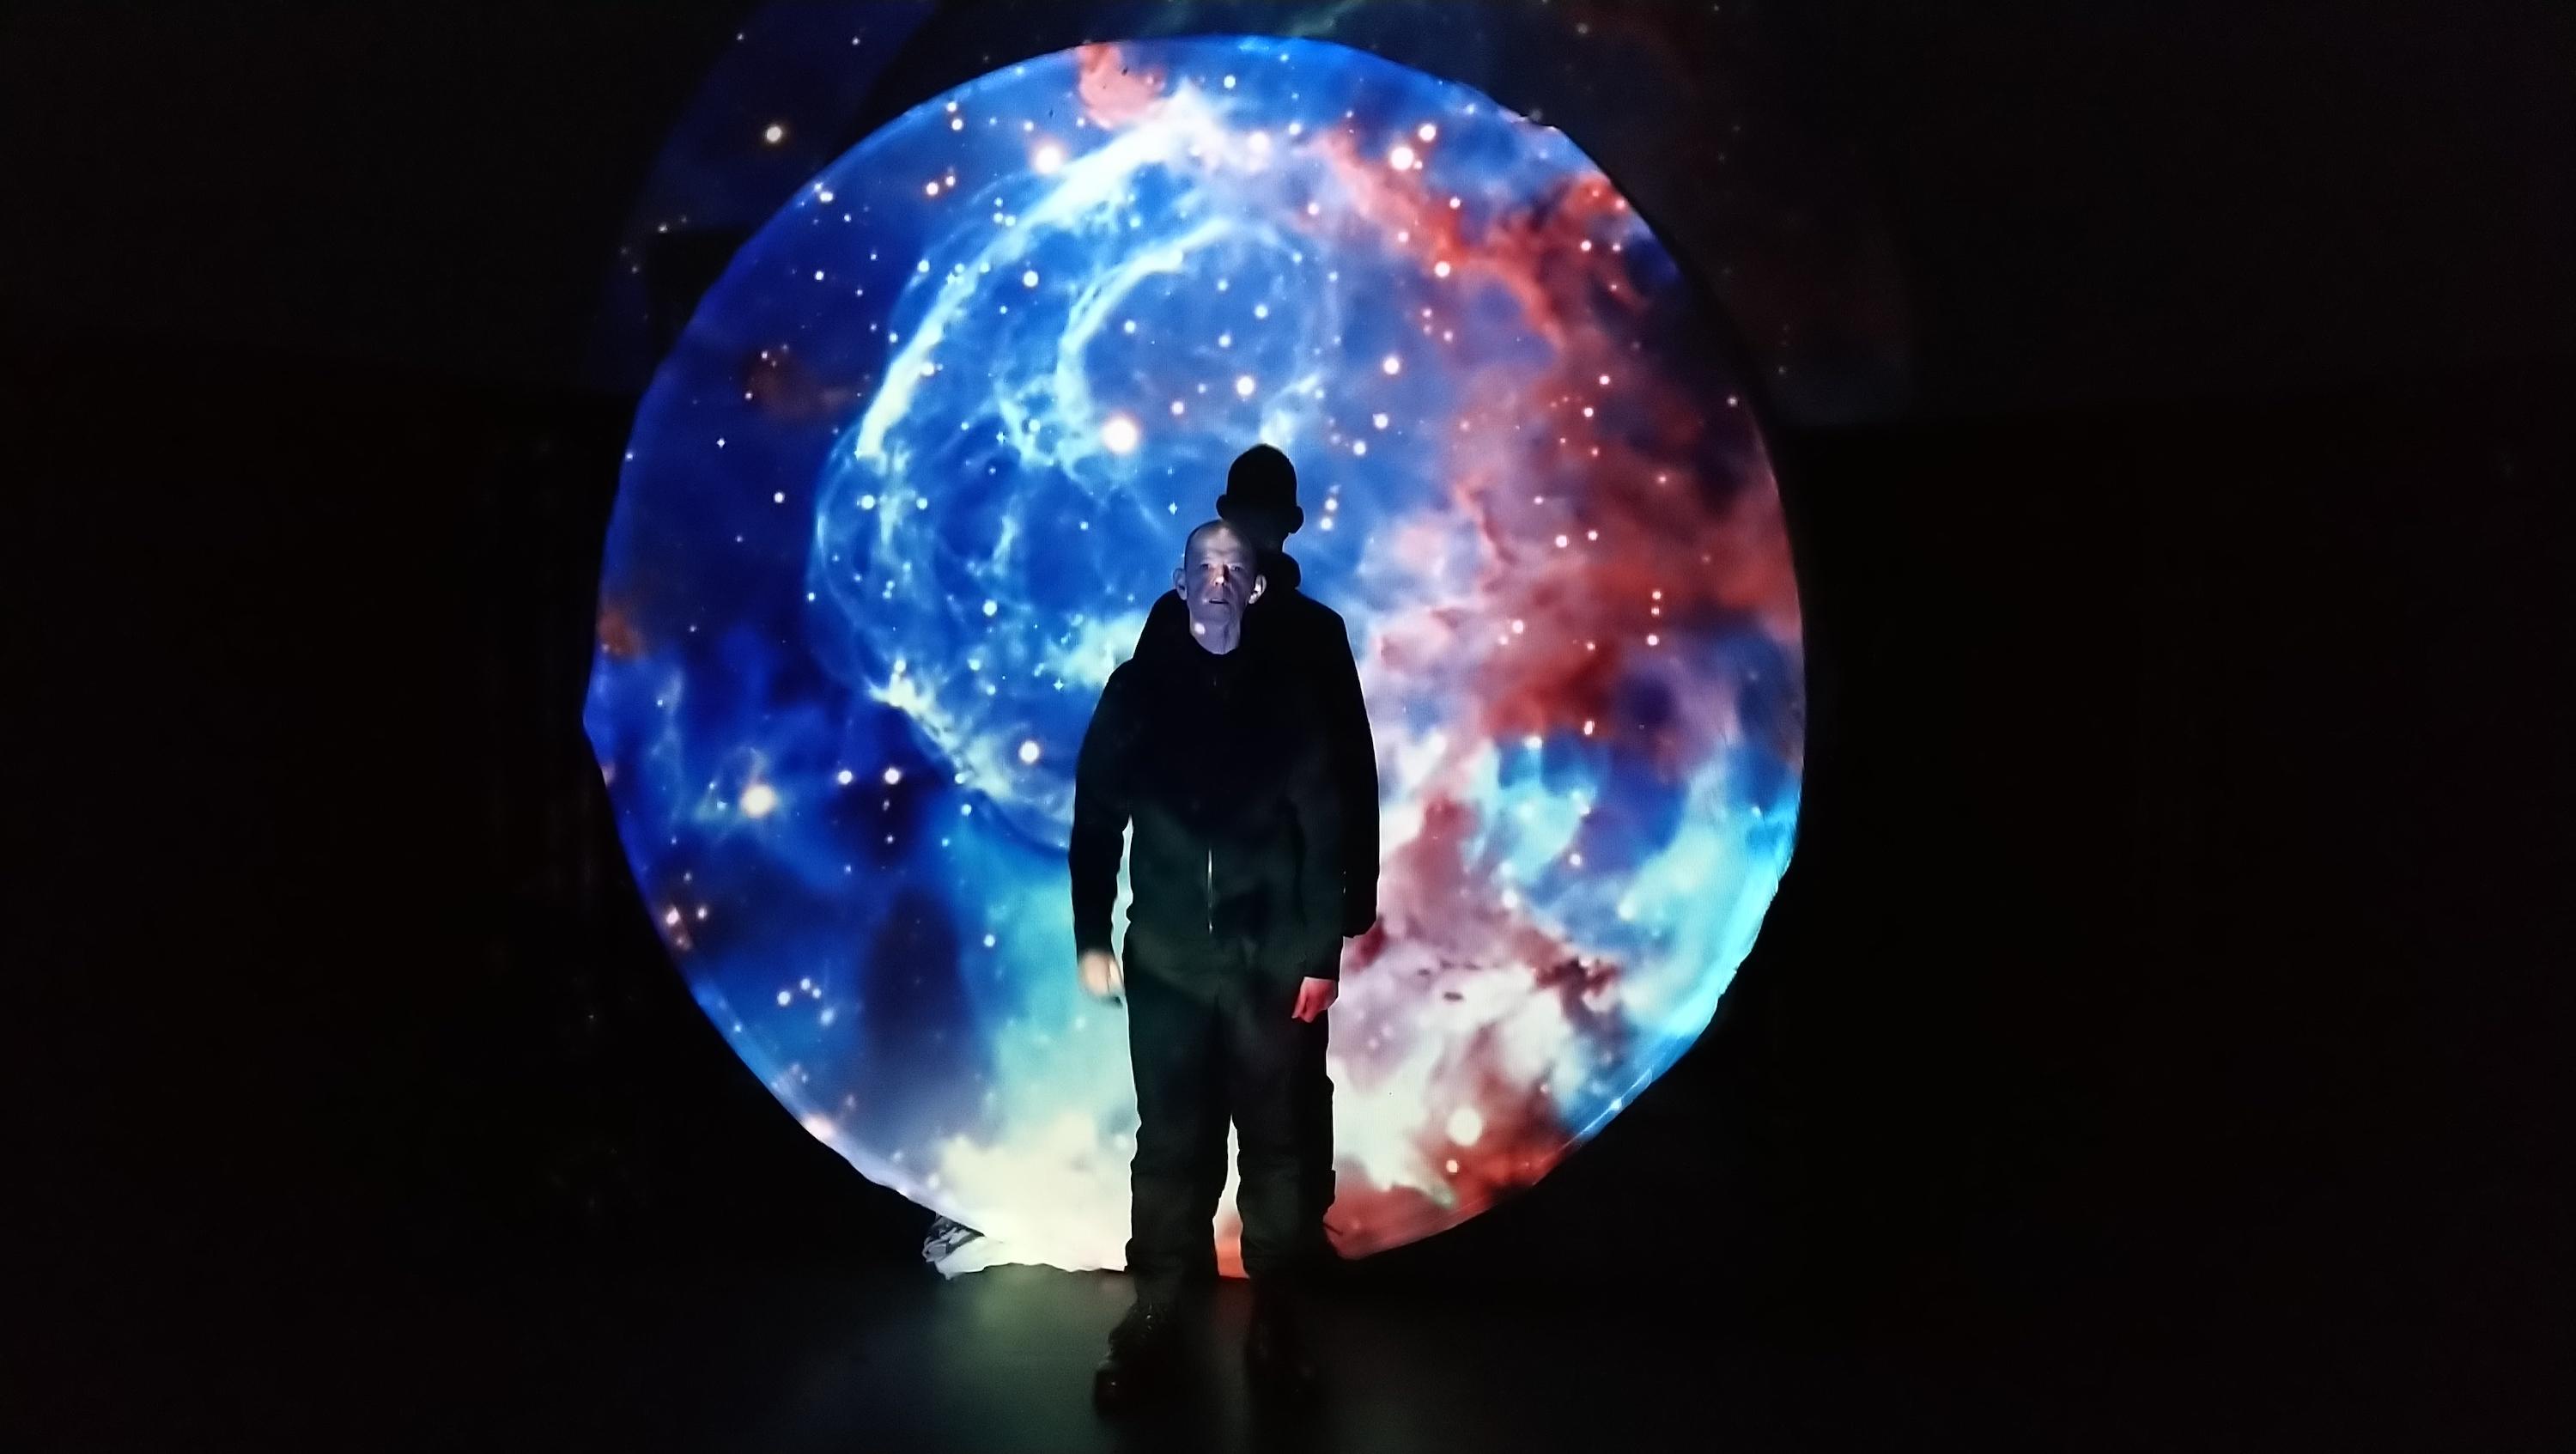 Storyteller Daniel Morden wearing dark clothes in a dark space stands in front of a disc that has images of the night sky projected onto it